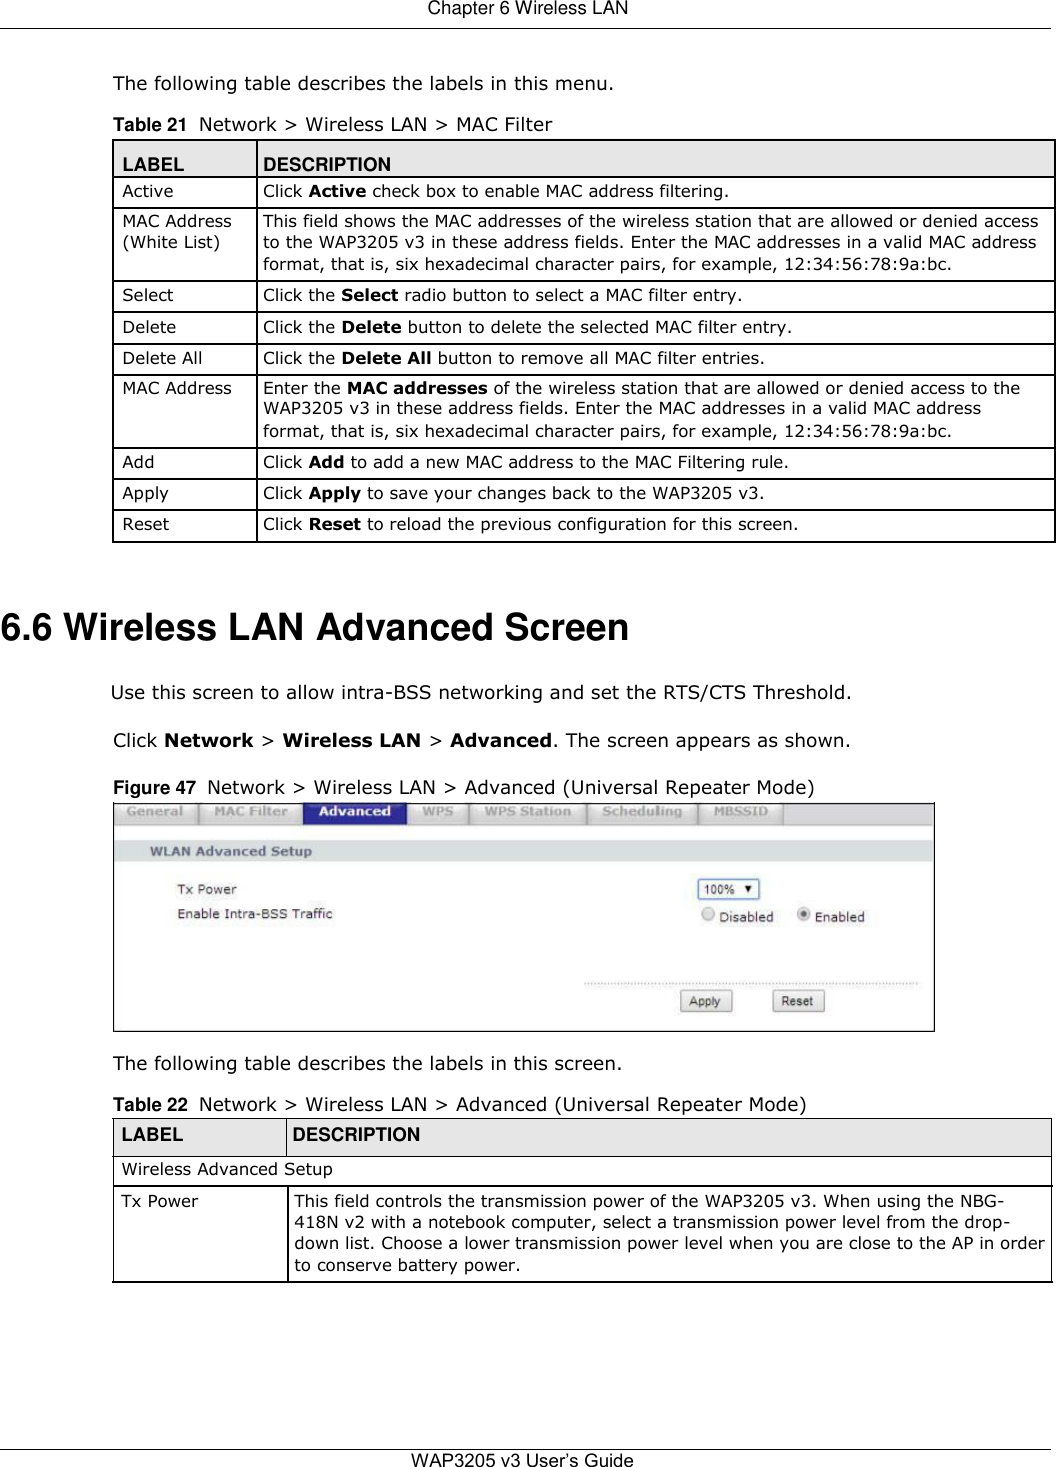  Chapter 6 Wireless LAN   The following table describes the labels in this menu.  Table 21  Network &gt; Wireless LAN &gt; MAC Filter  LABEL DESCRIPTION Active Click Active check box to enable MAC address filtering.   MAC Address This field shows the MAC addresses of the wireless station that are allowed or denied access (White List) to the WAP3205 v3 in these address fields. Enter the MAC addresses in a valid MAC address  format, that is, six hexadecimal character pairs, for example, 12:34:56:78:9a:bc.   Select Click the Select radio button to select a MAC filter entry.   Delete Click the Delete button to delete the selected MAC filter entry.   Delete All Click the Delete All button to remove all MAC filter entries.   MAC Address Enter the MAC addresses of the wireless station that are allowed or denied access to the  WAP3205 v3 in these address fields. Enter the MAC addresses in a valid MAC address  format, that is, six hexadecimal character pairs, for example, 12:34:56:78:9a:bc.   Add Click Add to add a new MAC address to the MAC Filtering rule.   Apply Click Apply to save your changes back to the WAP3205 v3.   Reset Click Reset to reload the previous configuration for this screen.      6.6 Wireless LAN Advanced Screen  Use this screen to allow intra-BSS networking and set the RTS/CTS Threshold.  Click Network &gt; Wireless LAN &gt; Advanced. The screen appears as shown.  Figure 47  Network &gt; Wireless LAN &gt; Advanced (Universal Repeater Mode)             The following table describes the labels in this screen.  Table 22  Network &gt; Wireless LAN &gt; Advanced (Universal Repeater Mode)  LABEL DESCRIPTION  Wireless Advanced Setup  Tx Power This field controls the transmission power of the WAP3205 v3. When using the NBG-  418N v2 with a notebook computer, select a transmission power level from the drop-  down list. Choose a lower transmission power level when you are close to the AP in order  to conserve battery power.           WAP3205 v3 User’s Guide 